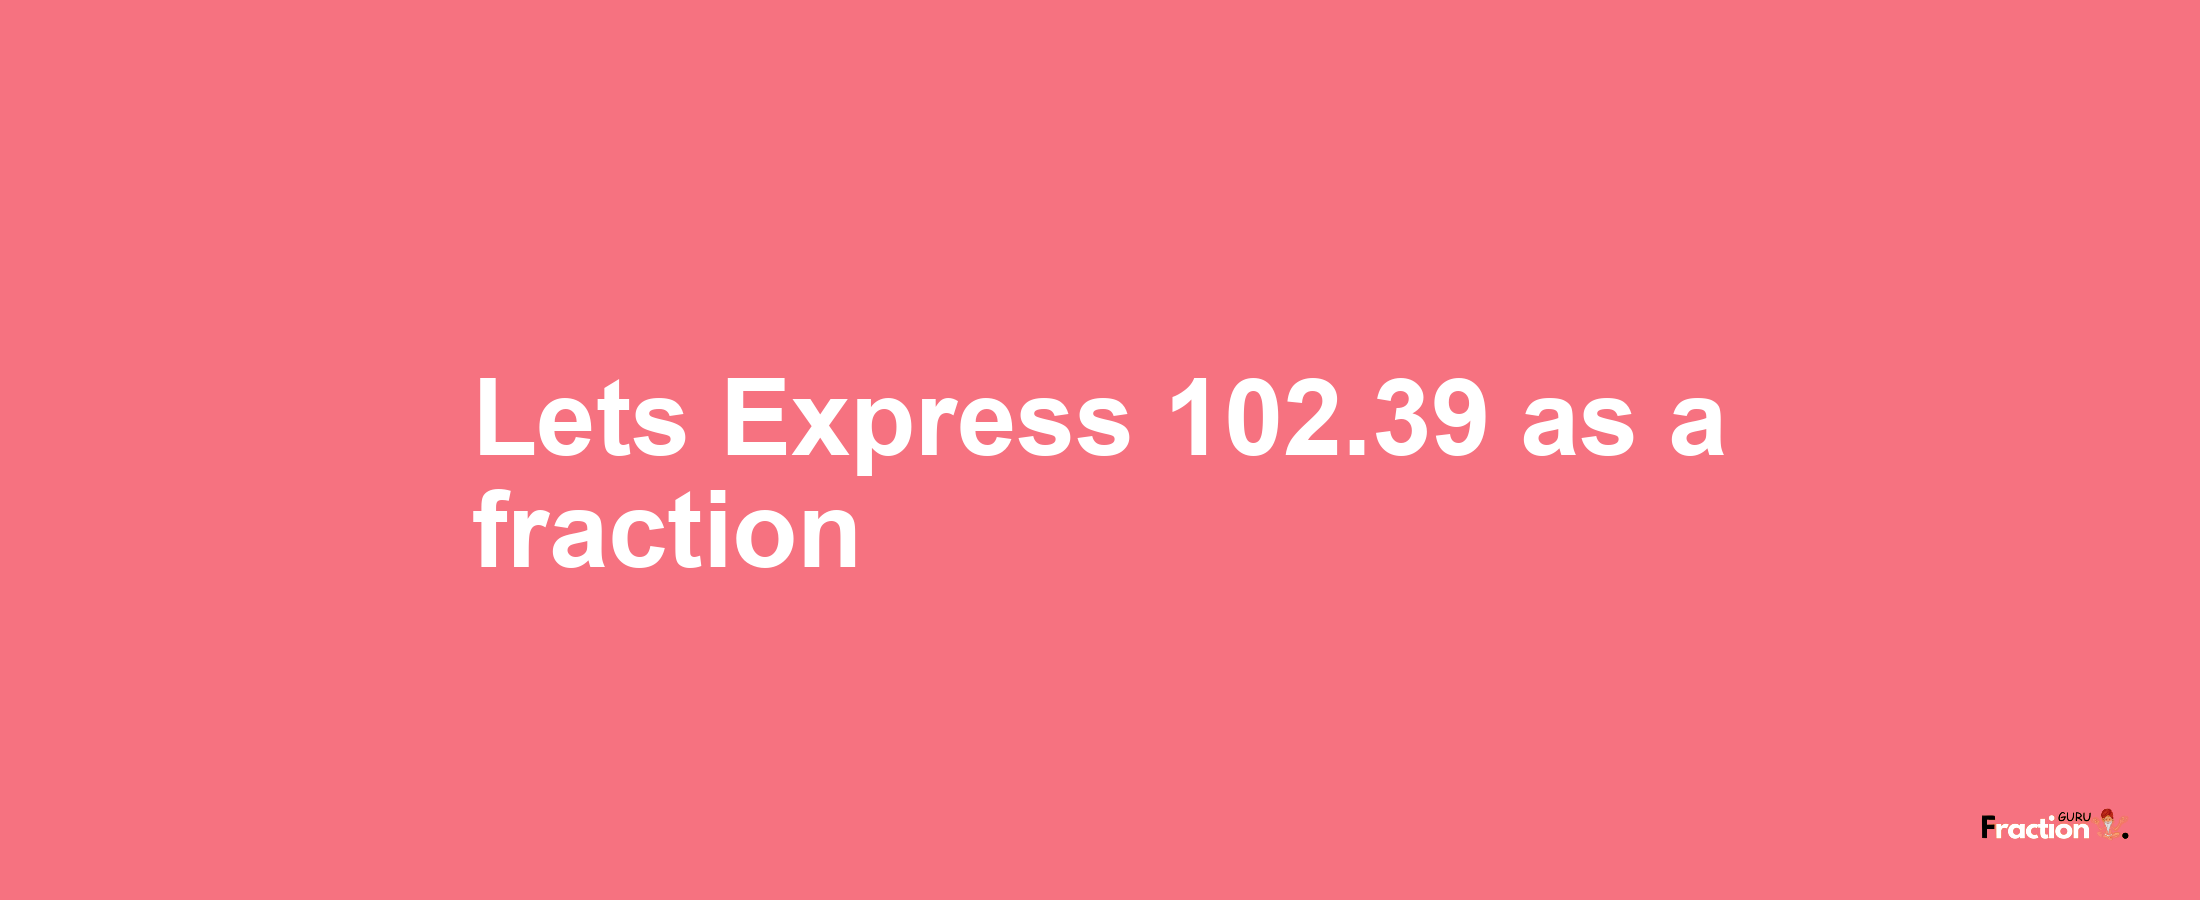 Lets Express 102.39 as afraction